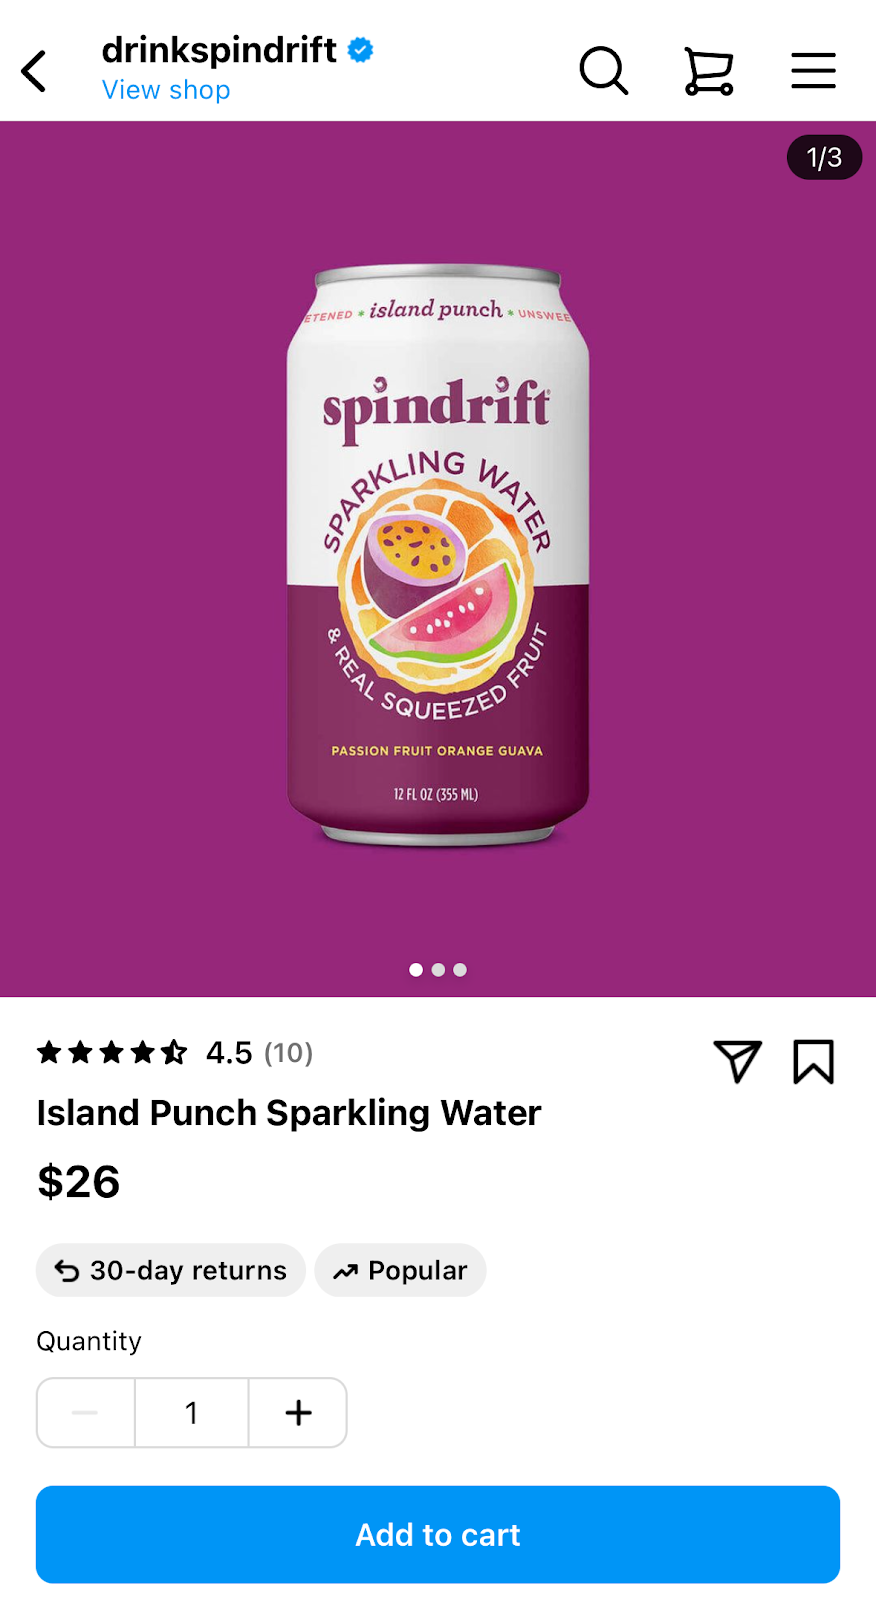 in-instagram product page for drinks brand spindrift showing sparkling water can